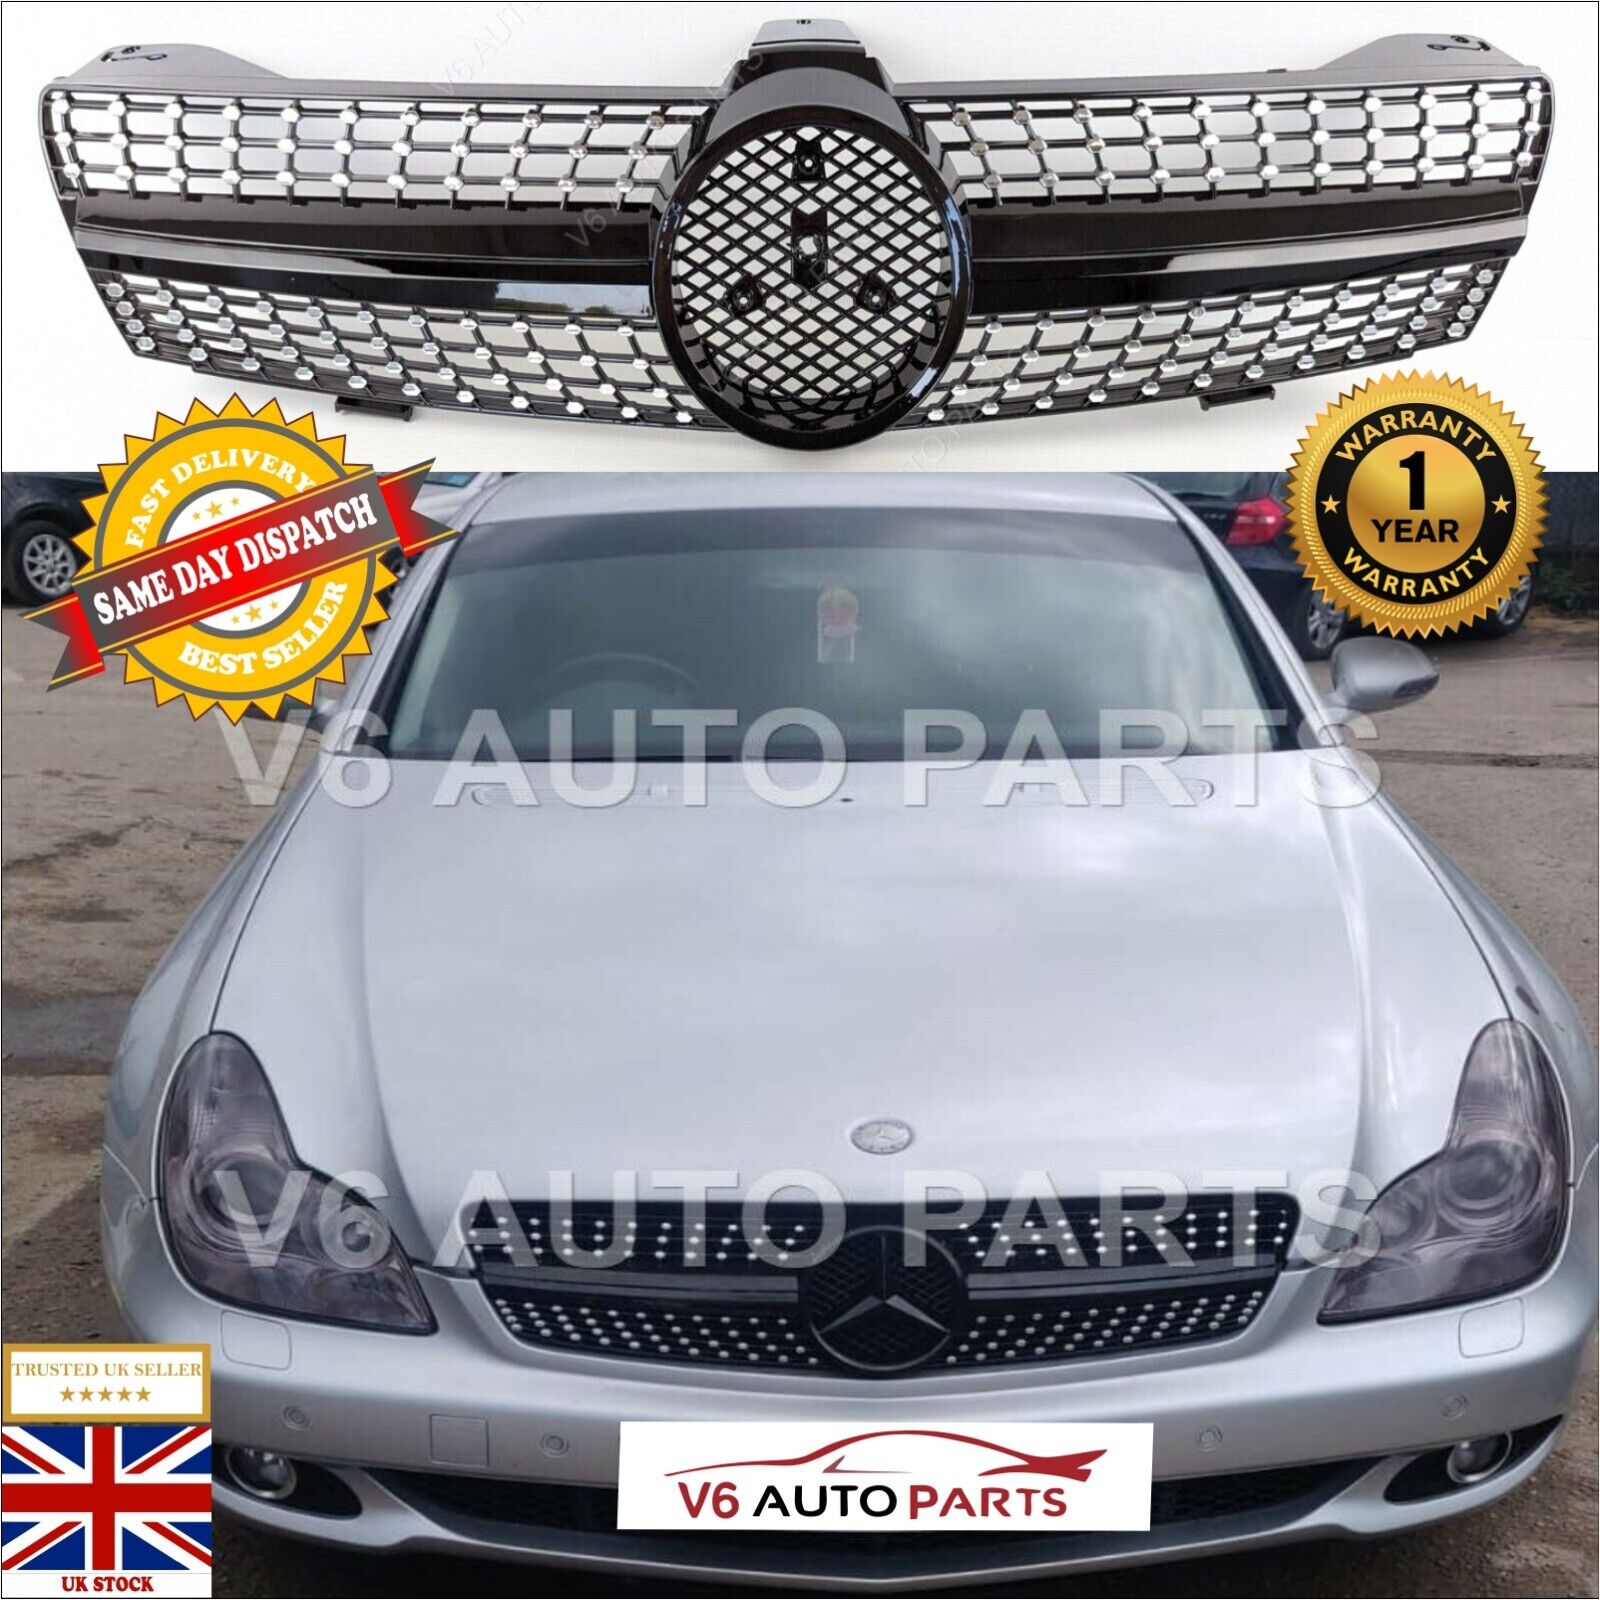 For Mercedes W219 CLS-Class CLS500 CLS55 Front Radiator Grille 2005-08 Pre-Facelift